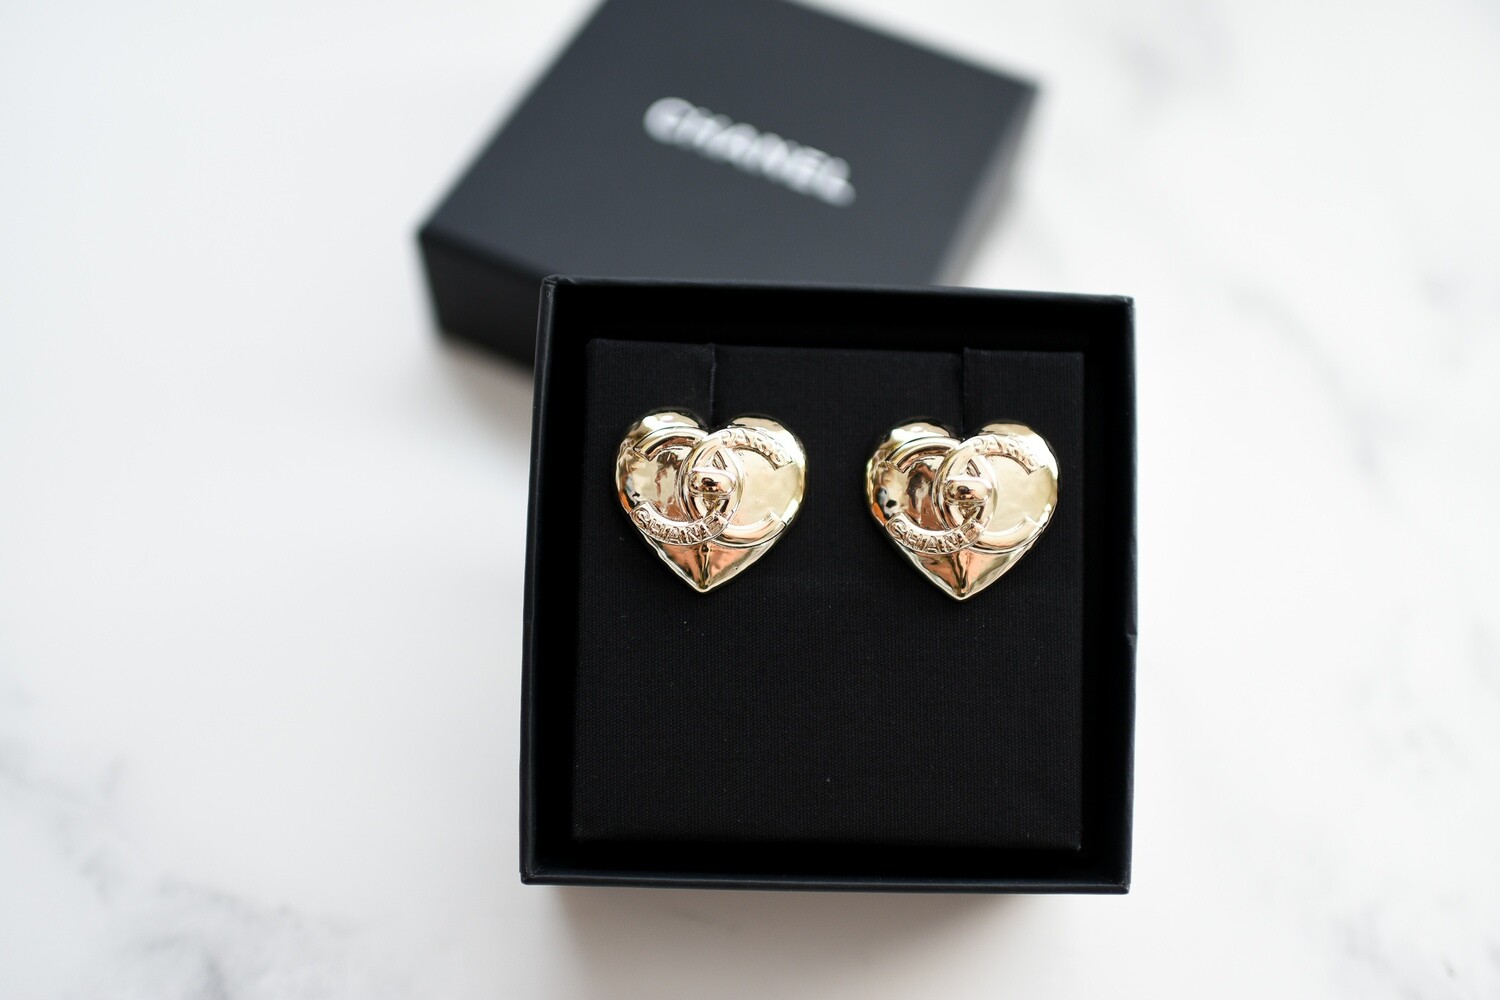 Chanel Statement CC Turnlock Heart Earrings in Gold (No Stone), New in Box  GA001